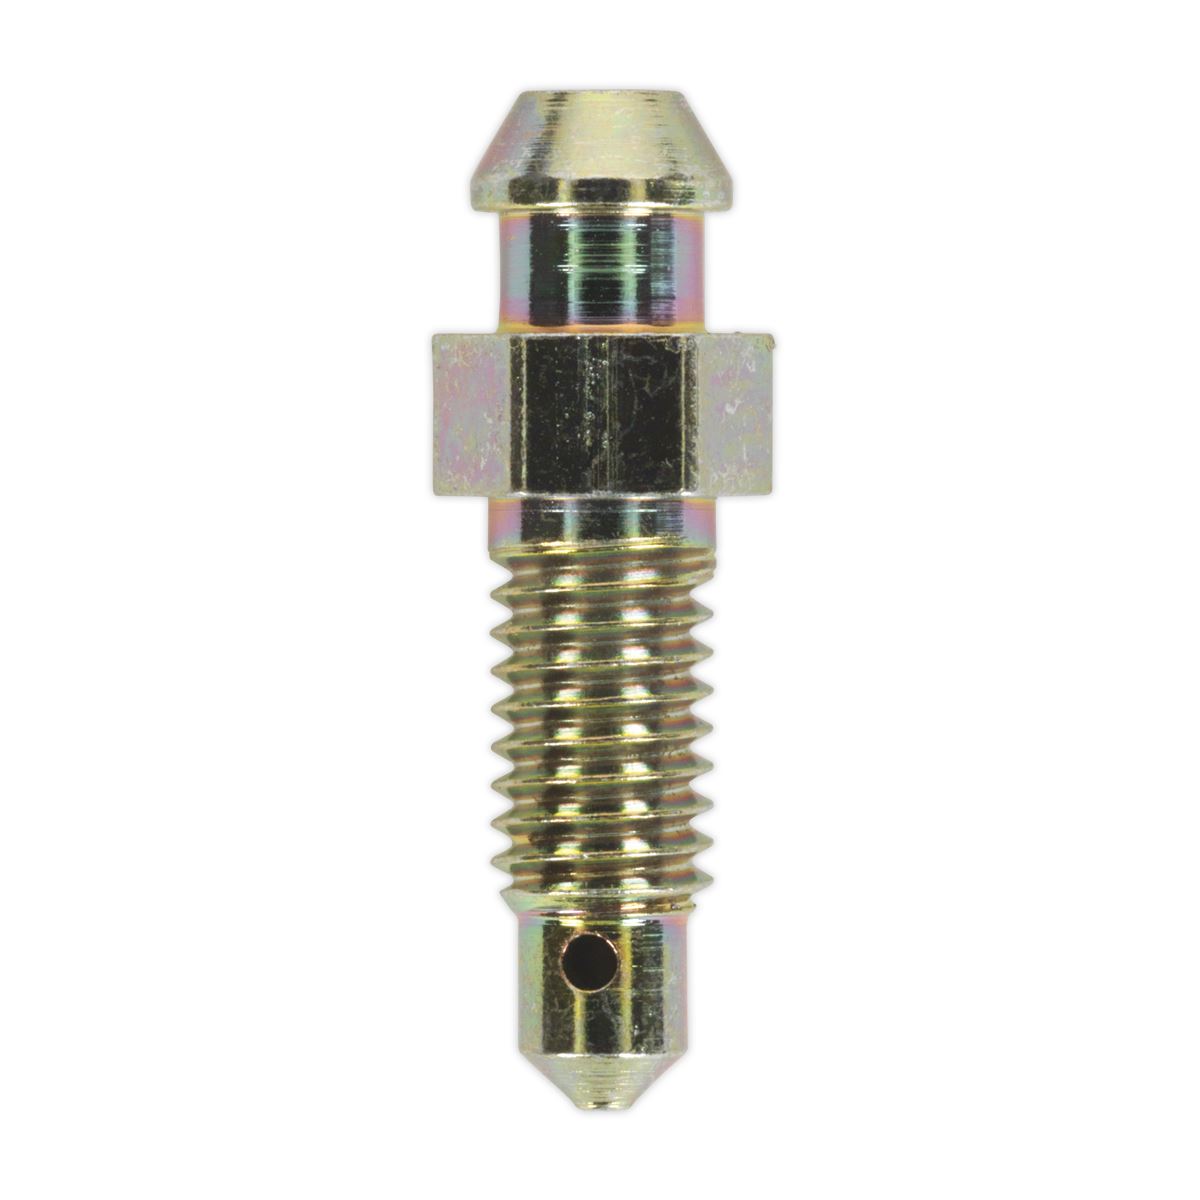 Sealey Brake Bleed Screw M6 x 29mm 1mm Pitch Pack of 10